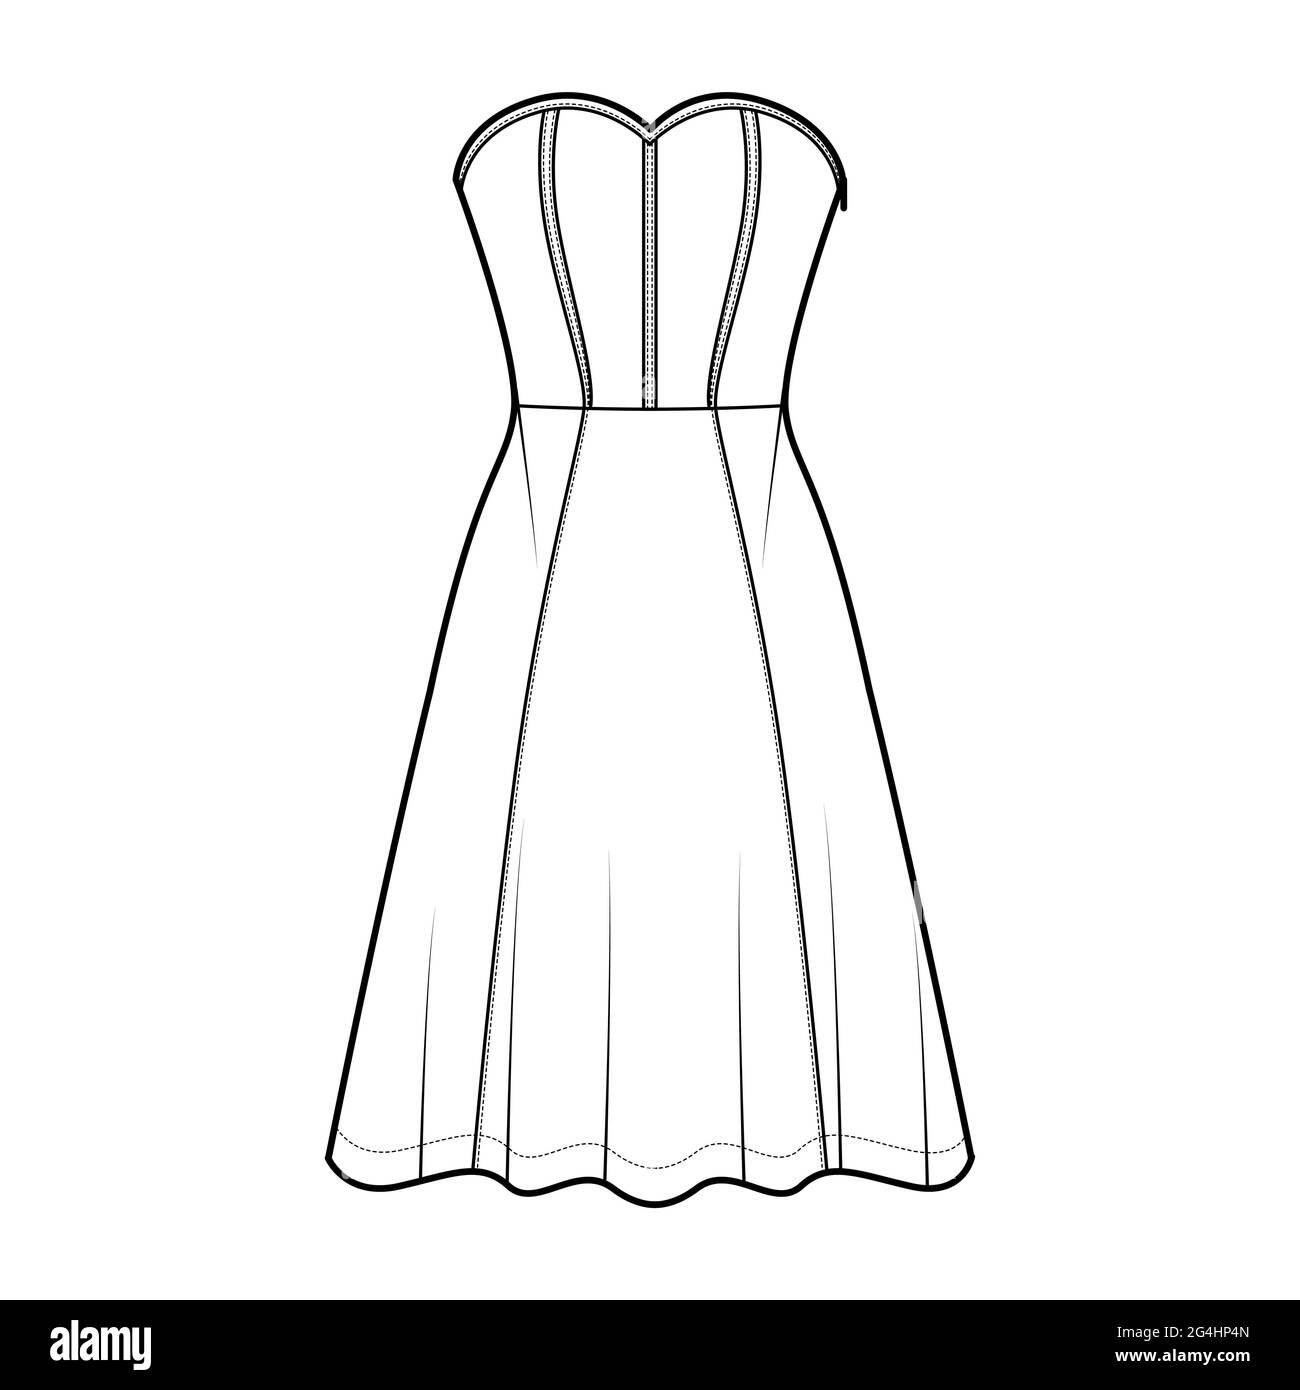 Dress corset technical fashion illustration with sleeveless, strapless, fitted body, knee length circular skirt. Flat apparel front, white color style Stock Vector